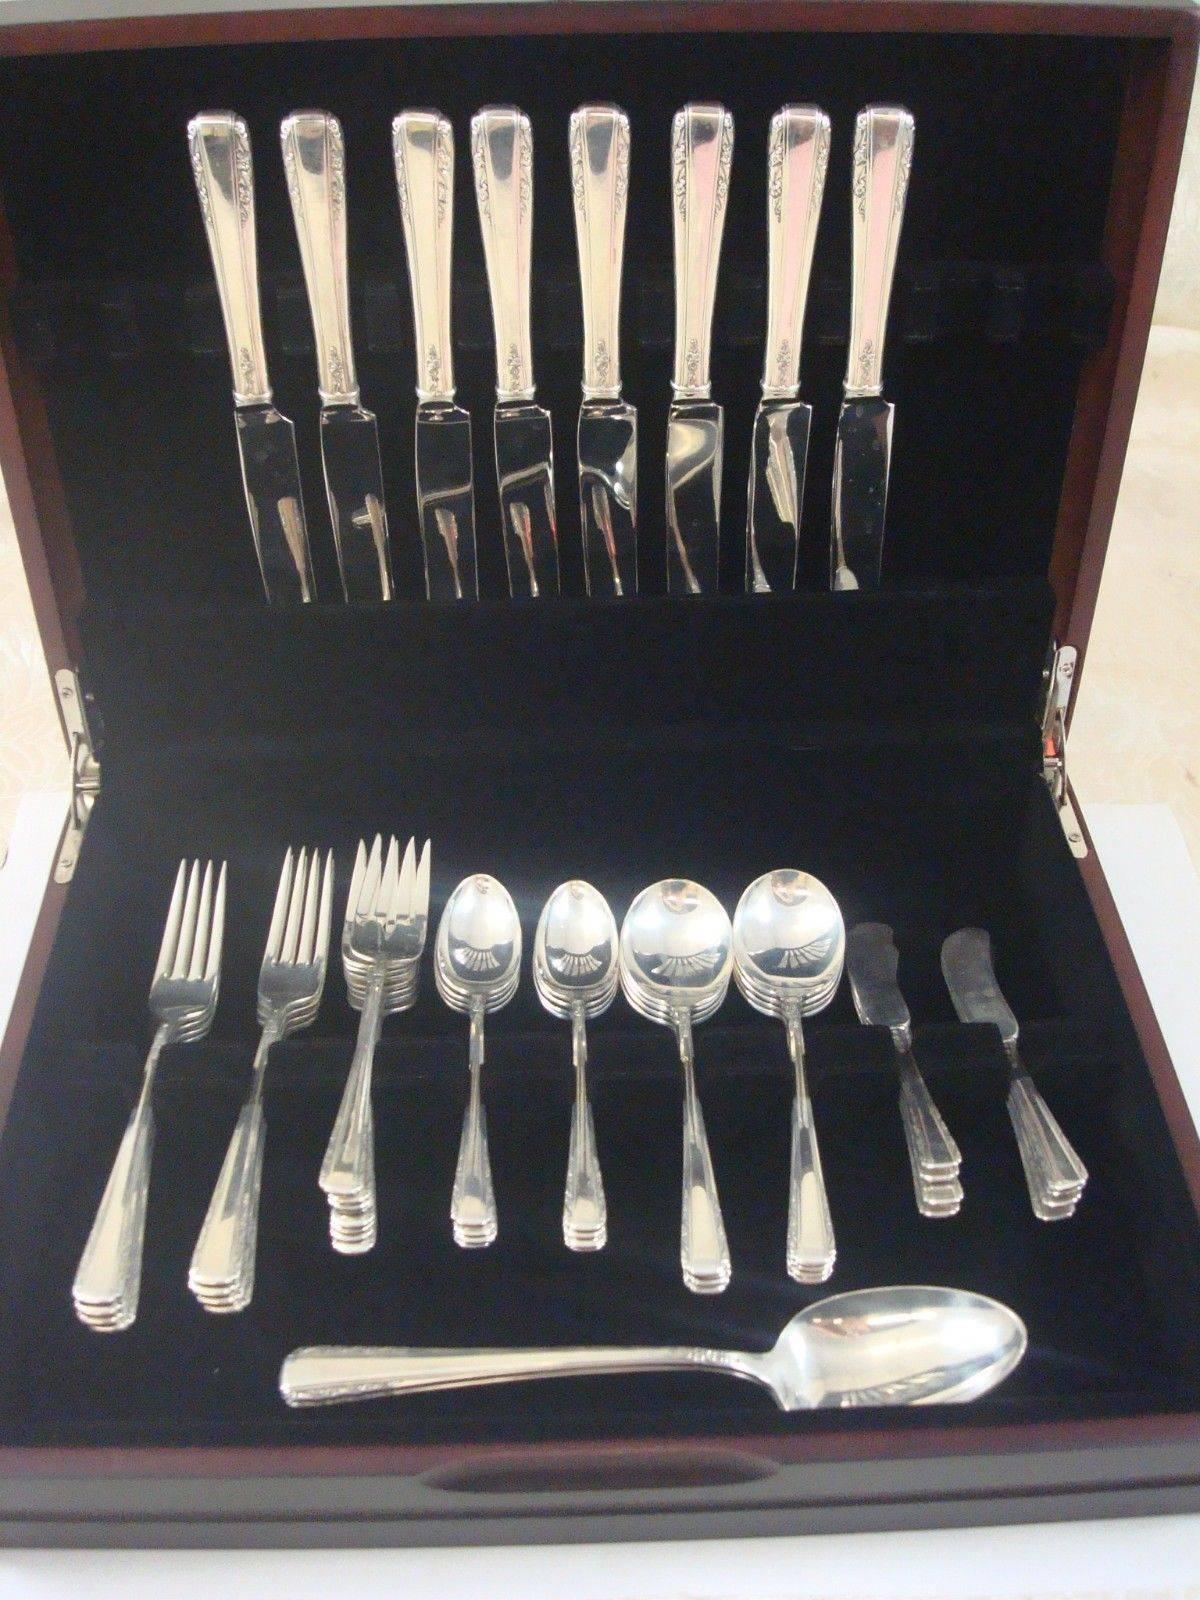 Courtship by International sterling silver flatware set-50 pieces. This set includes: 

Eight knives, 9 1/8